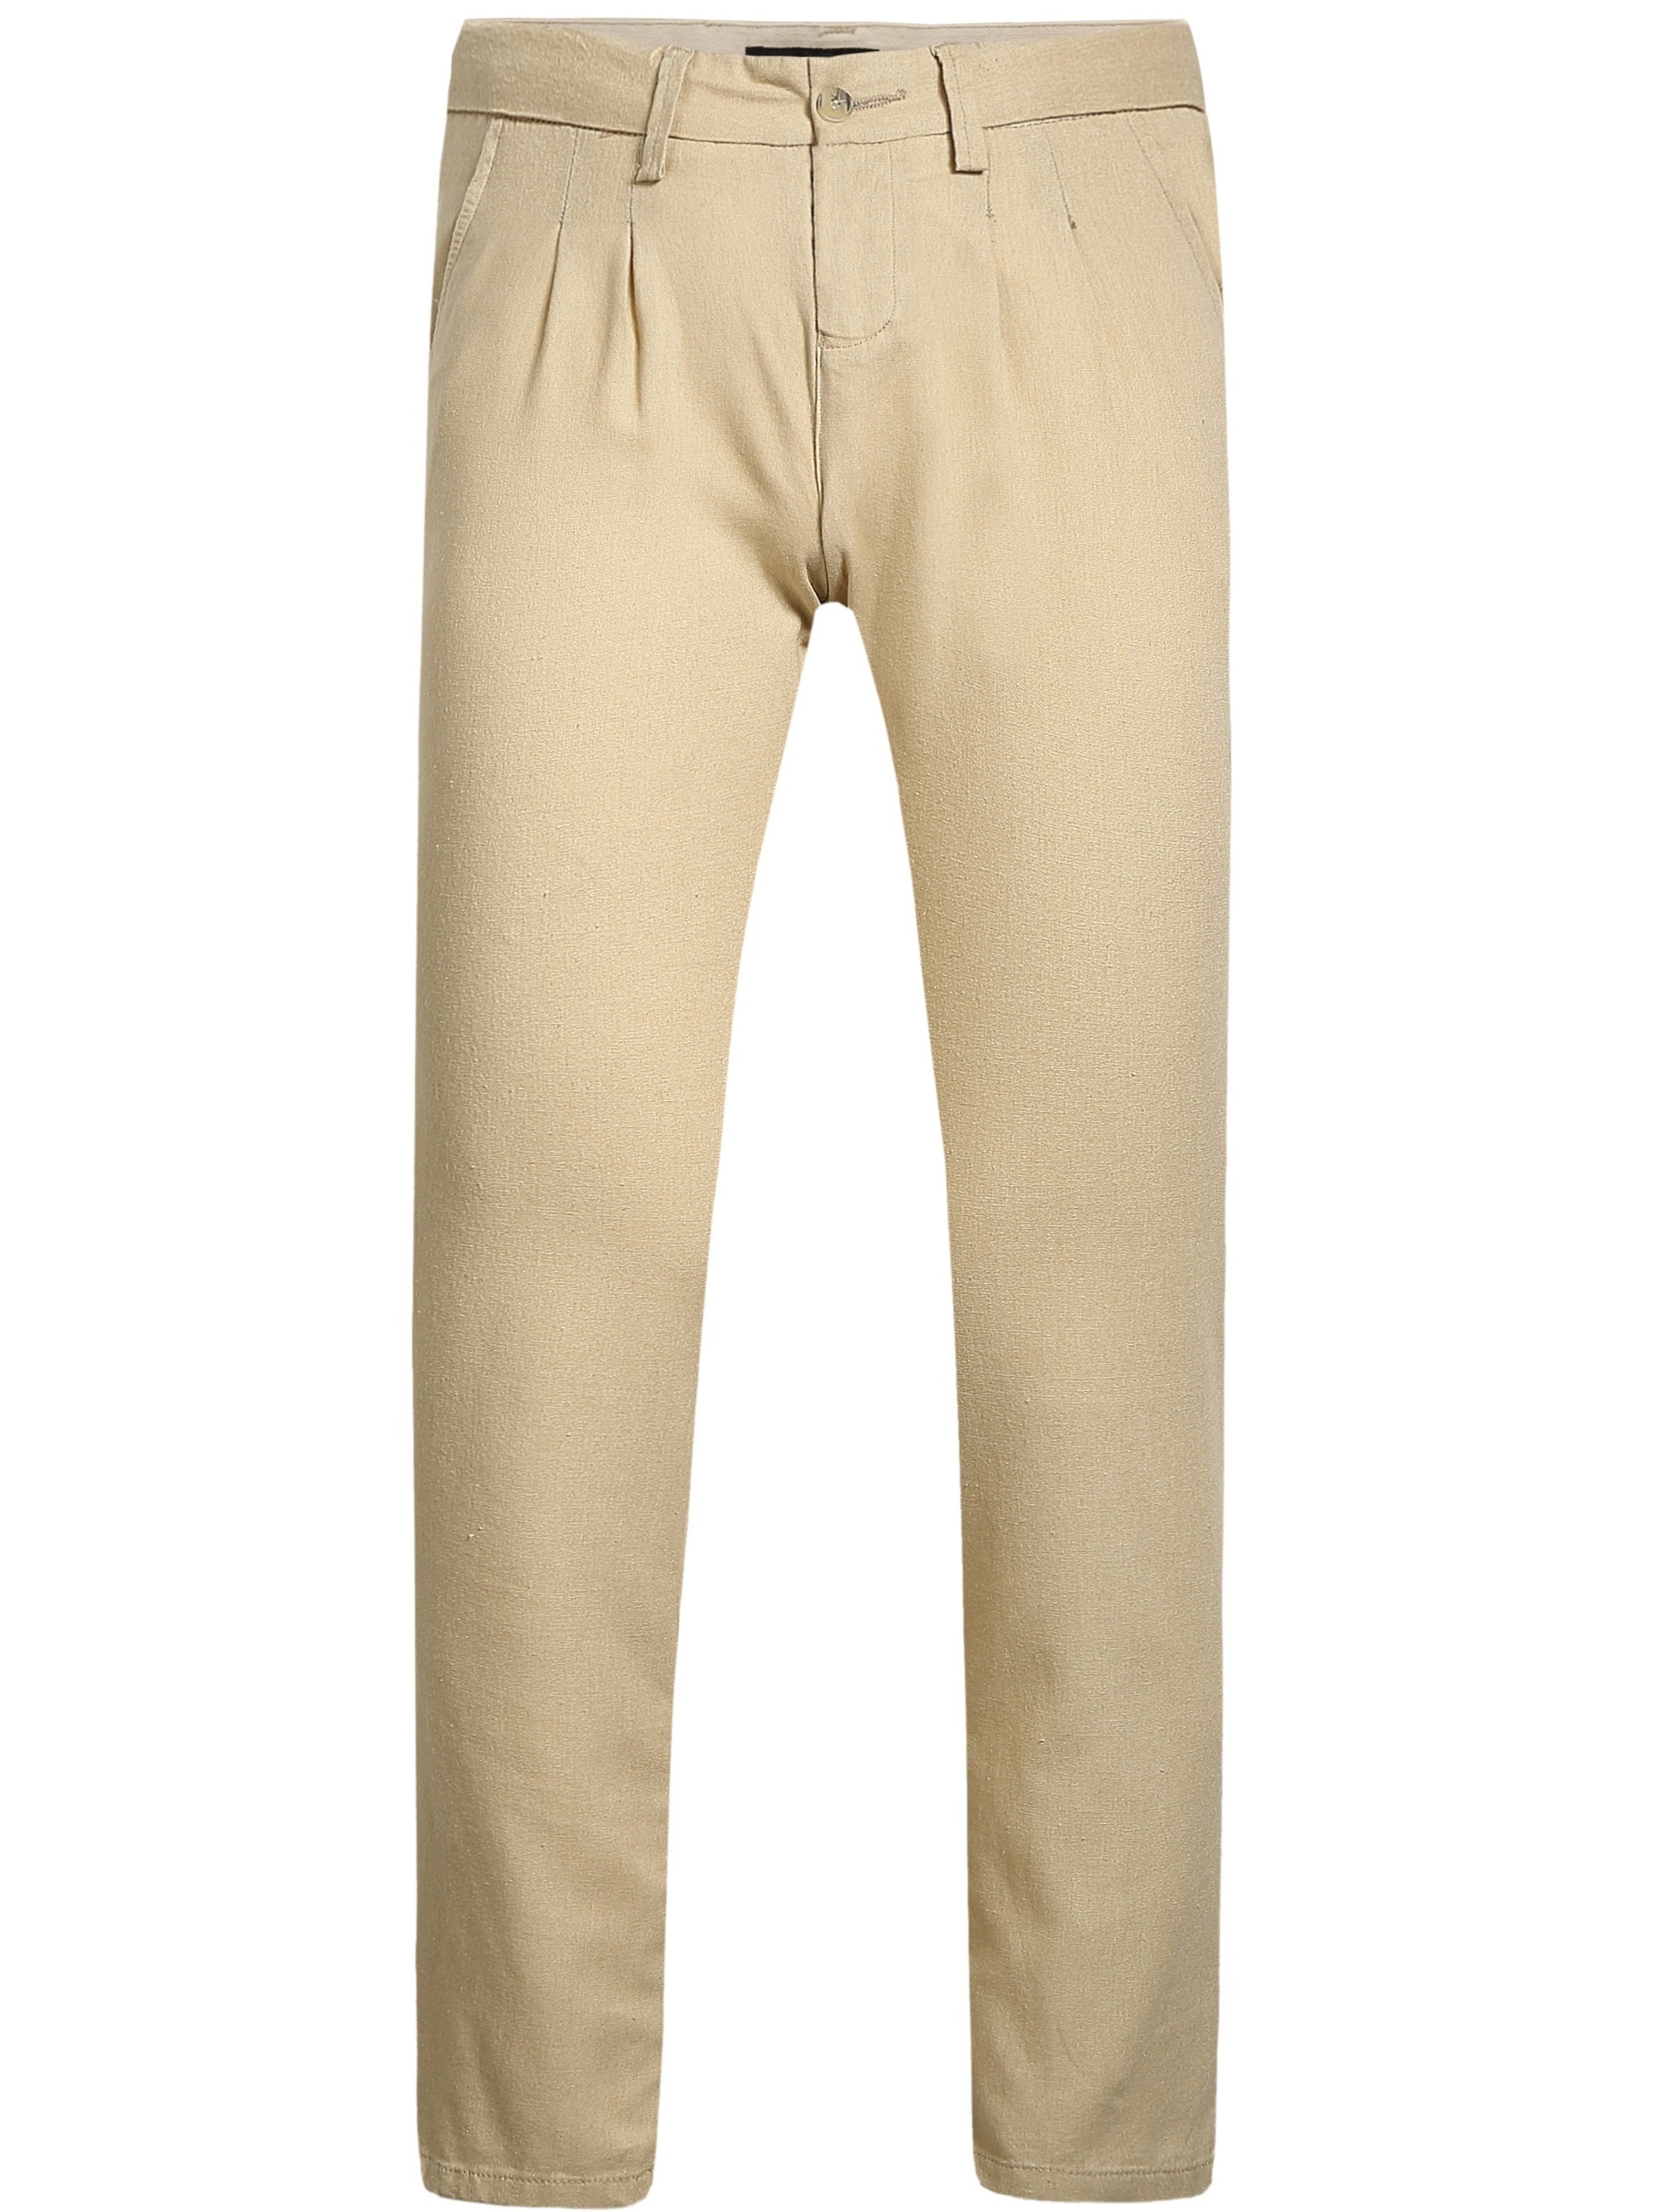 Men's Solid Linen Pants Lightweight Trousers Relaxing Pants With Pockets